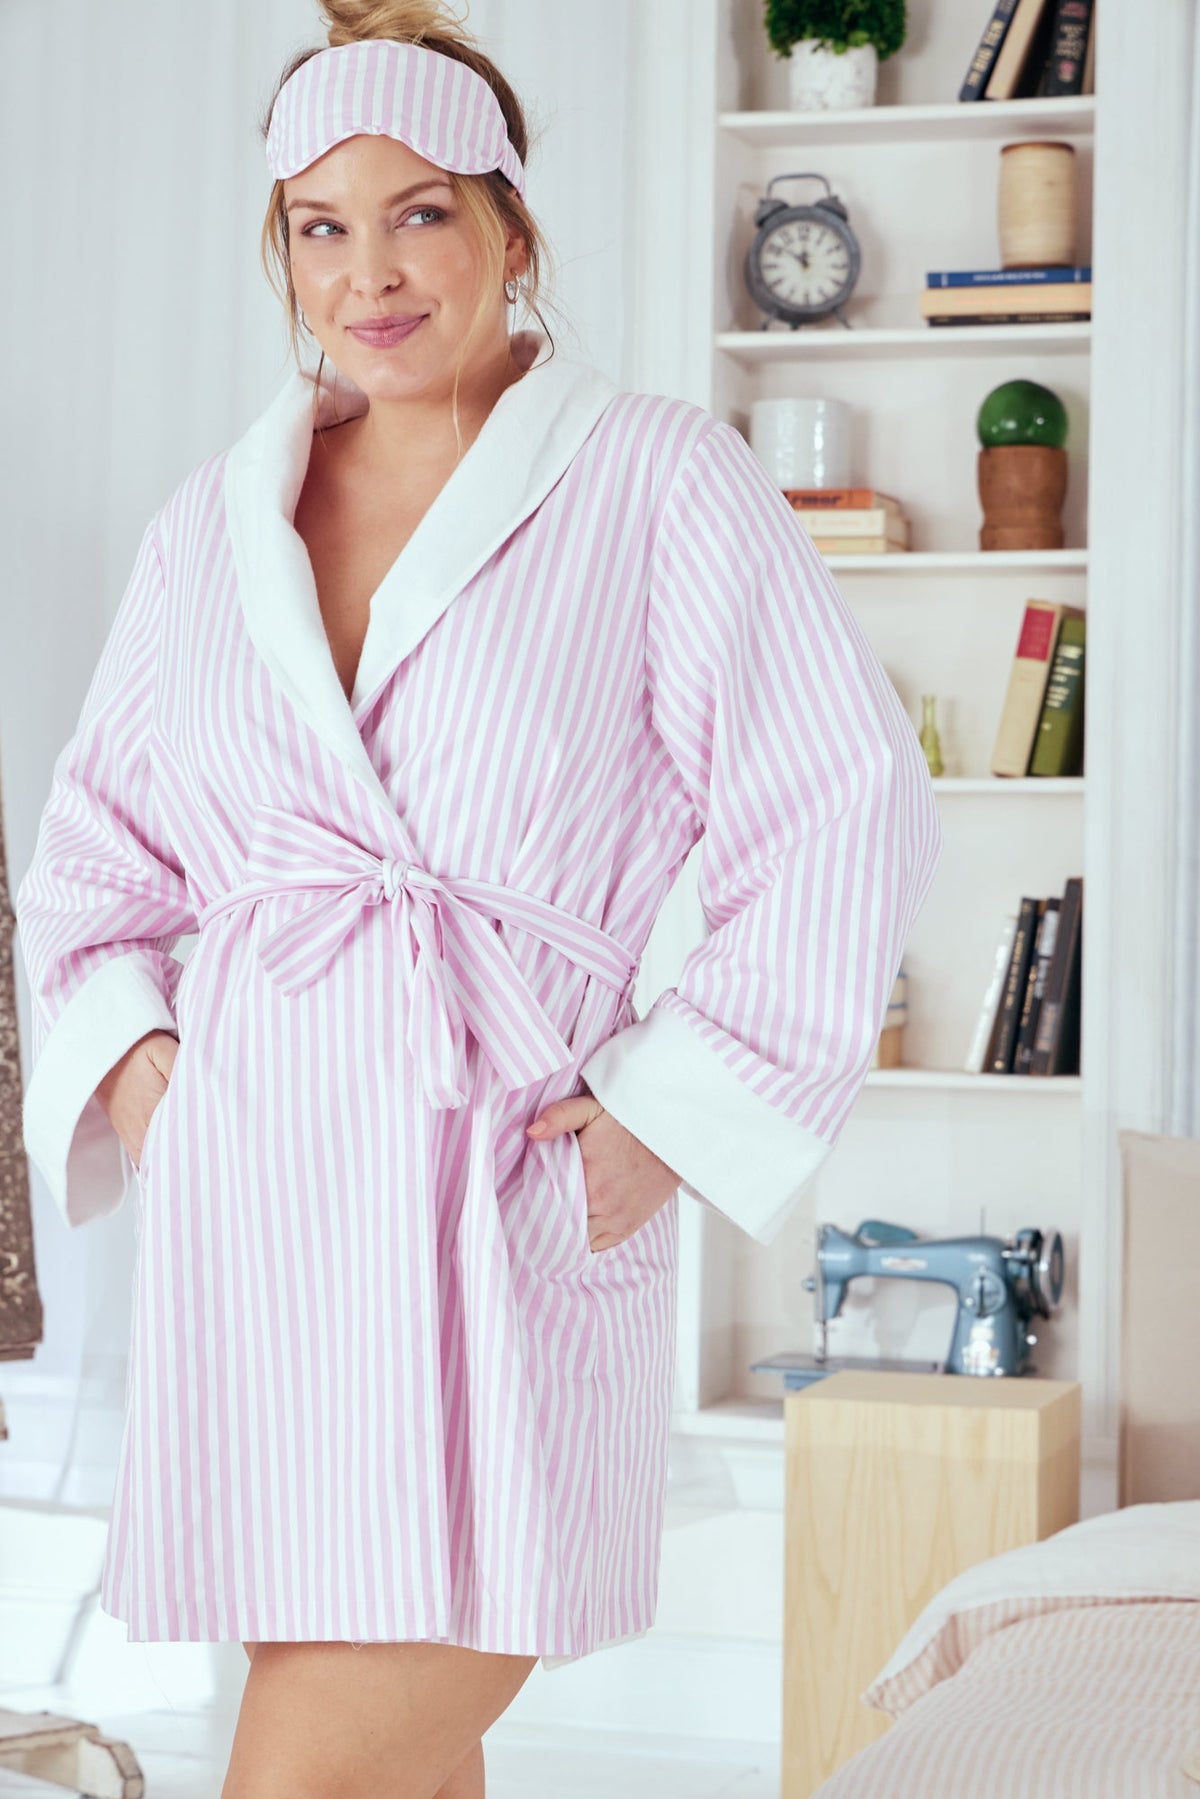 A lady wearing a pink and white stripes plus size robe.